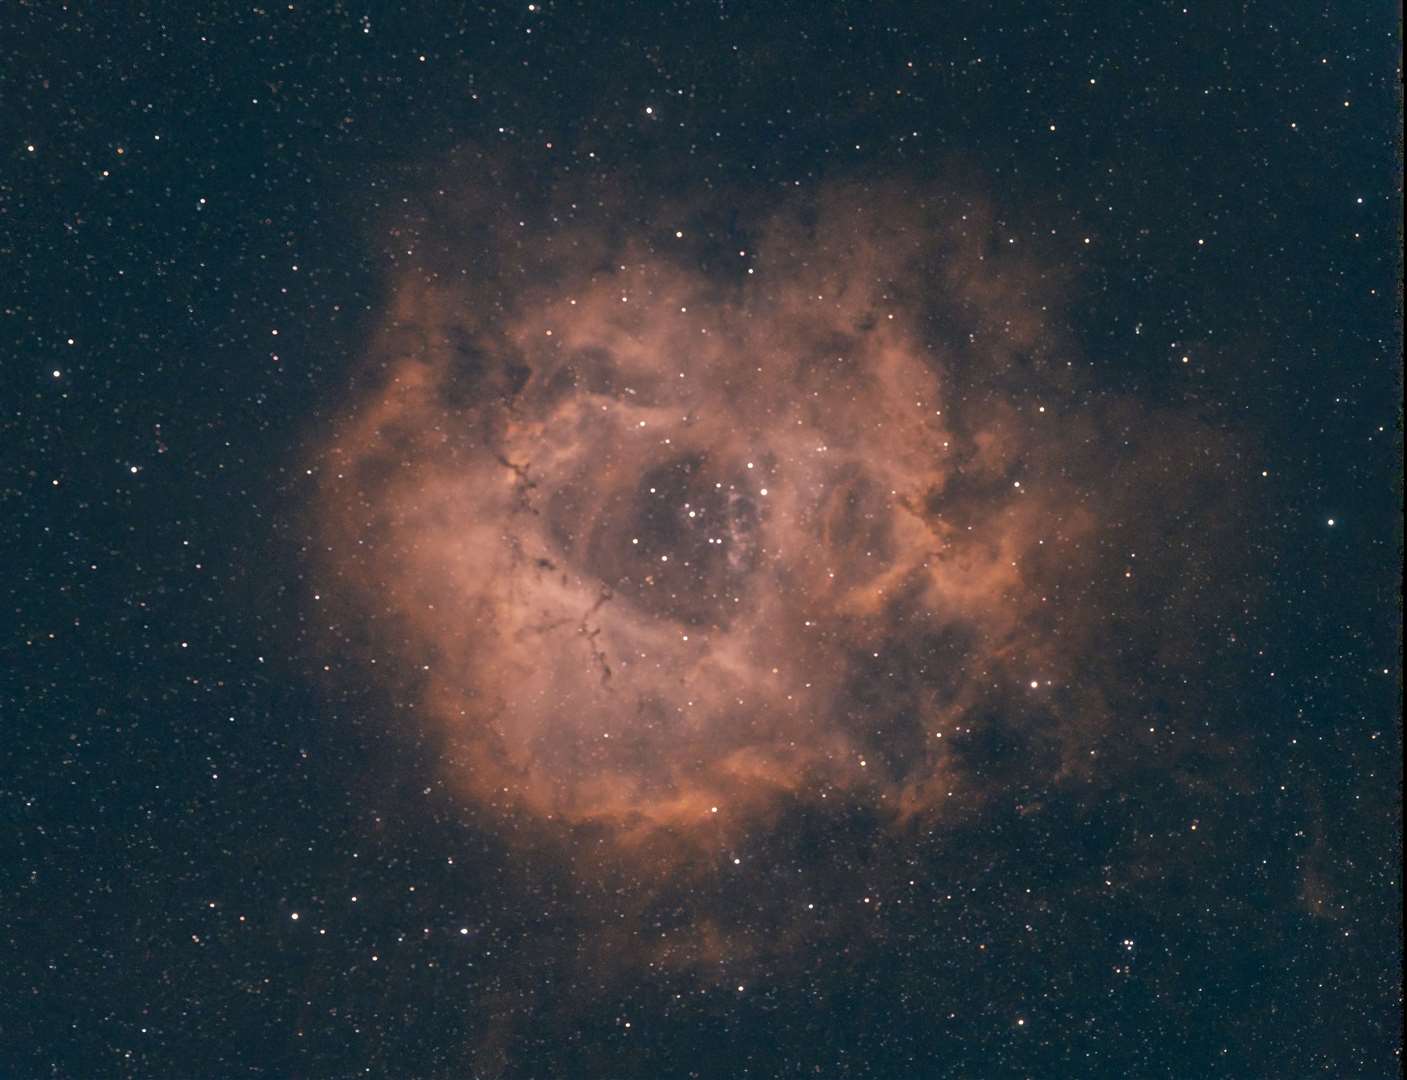 The Rosette Nebula is also located in the constellation of Monoceros and is 5,200 light years distant. The Nebula is also sometimes referred as the 'Skull Nebula' because there is a resemblance to a human skull. The Rosette is approximately 130 light years across and the radiation from young stars excites atoms and produces the nebula we see today.